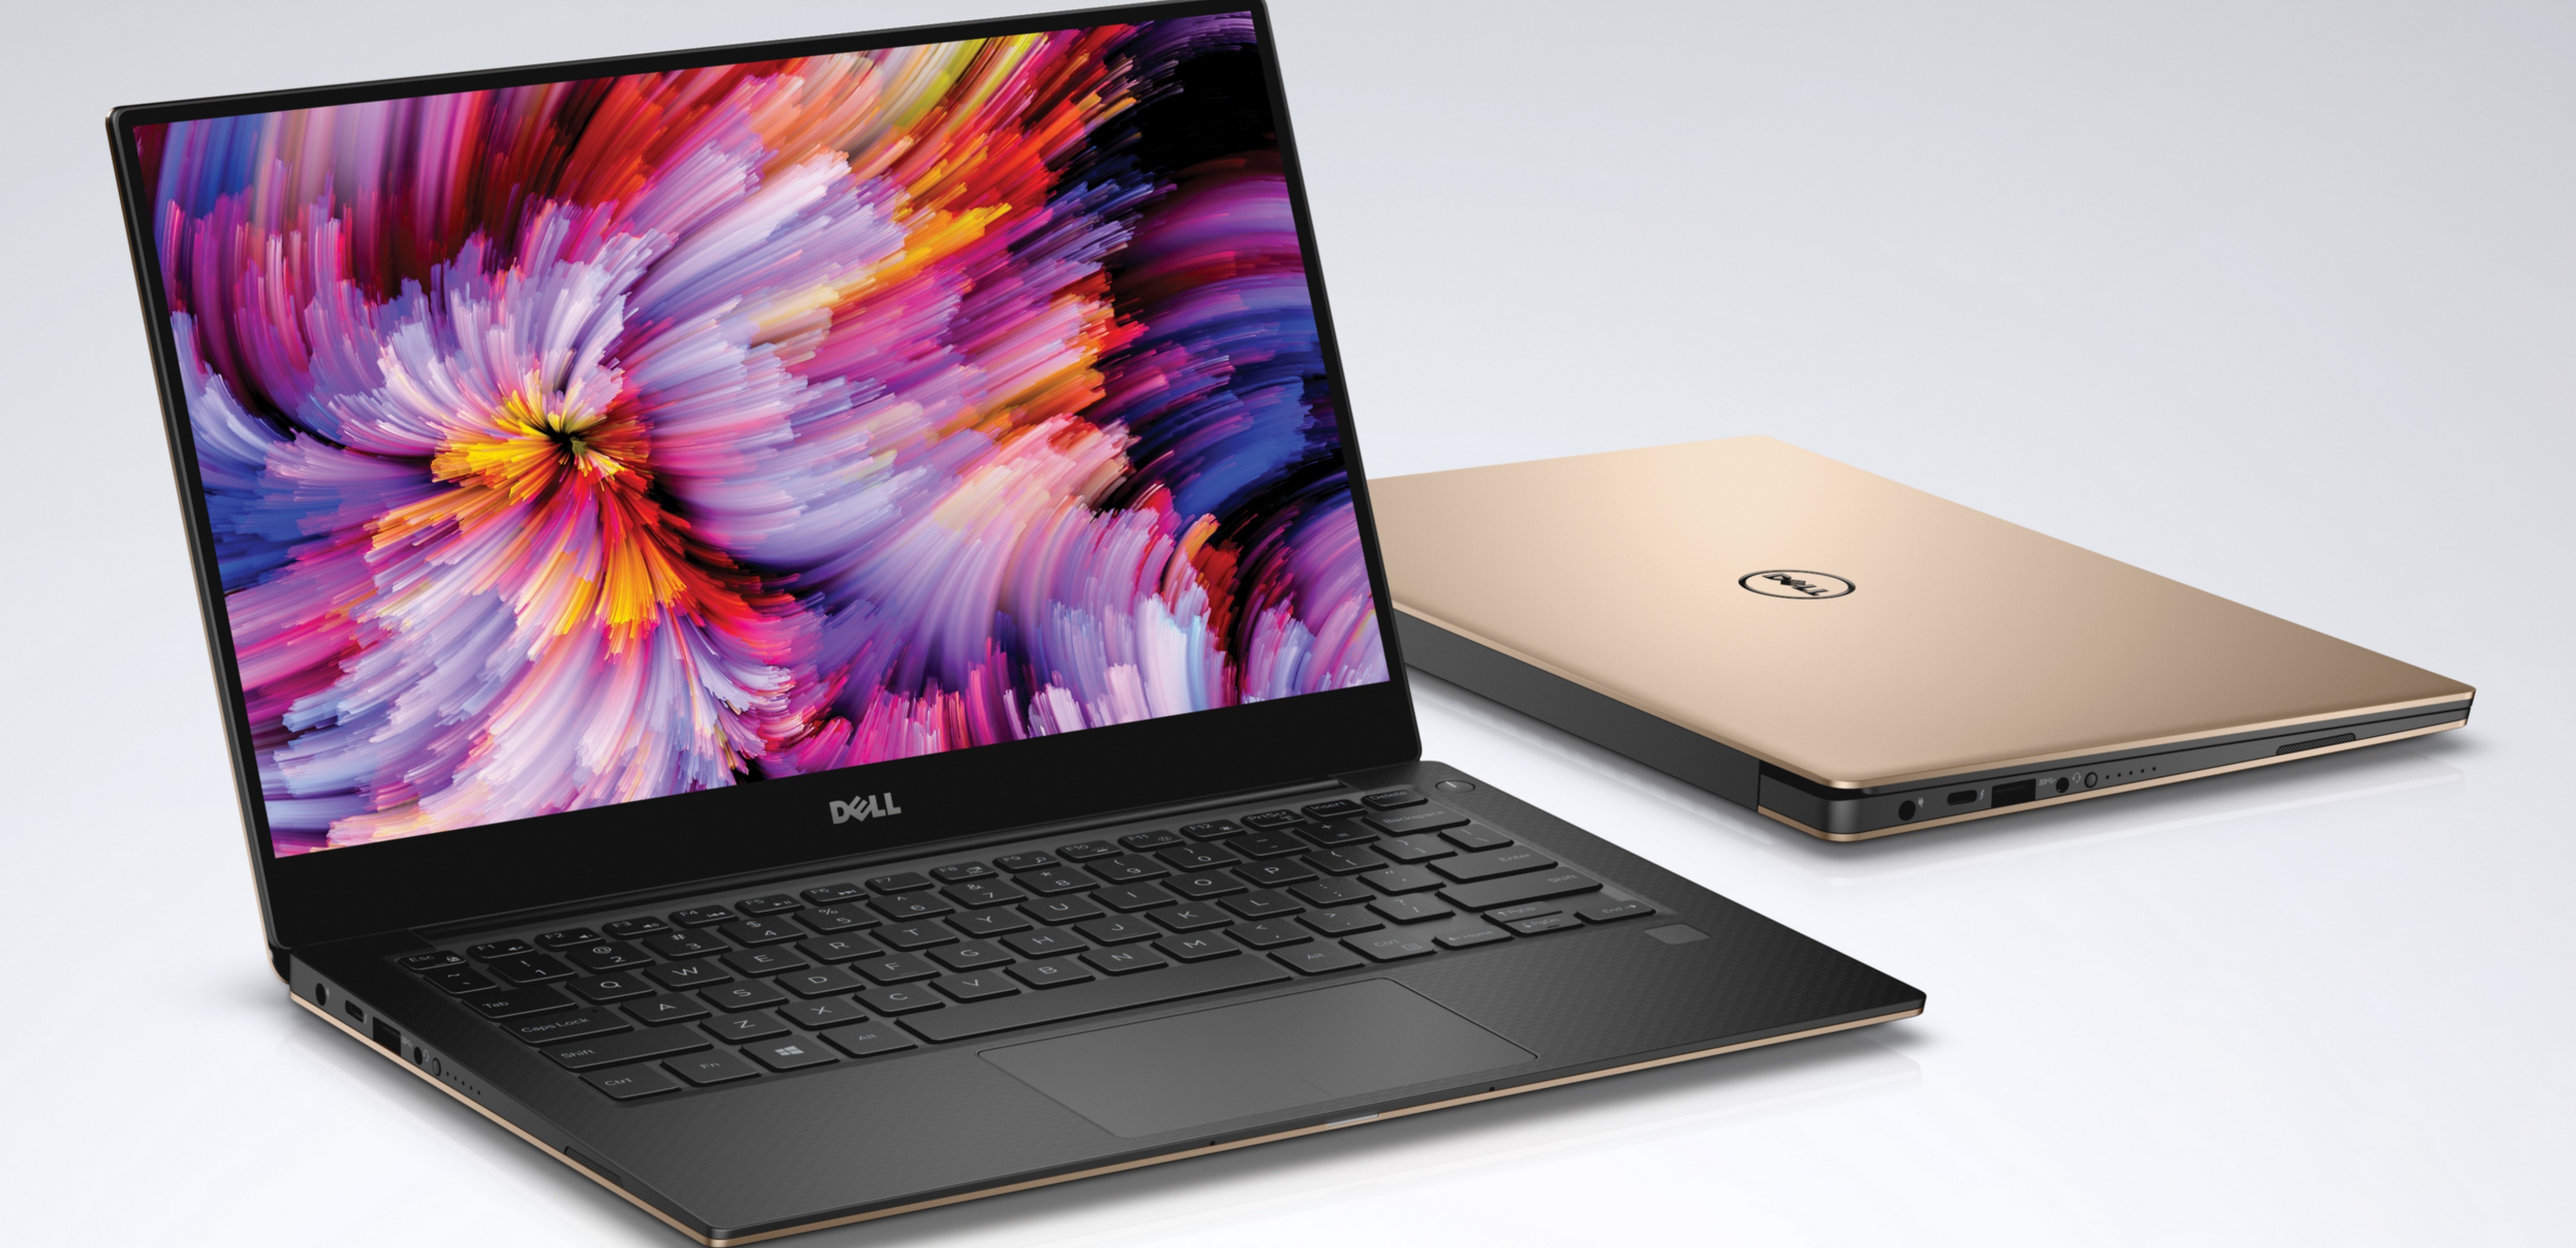 Gedrag Vriendin het doel Dell introduces XPS and Inspiron laptops with Windows 10 in new colors |  Windows Experience Blog